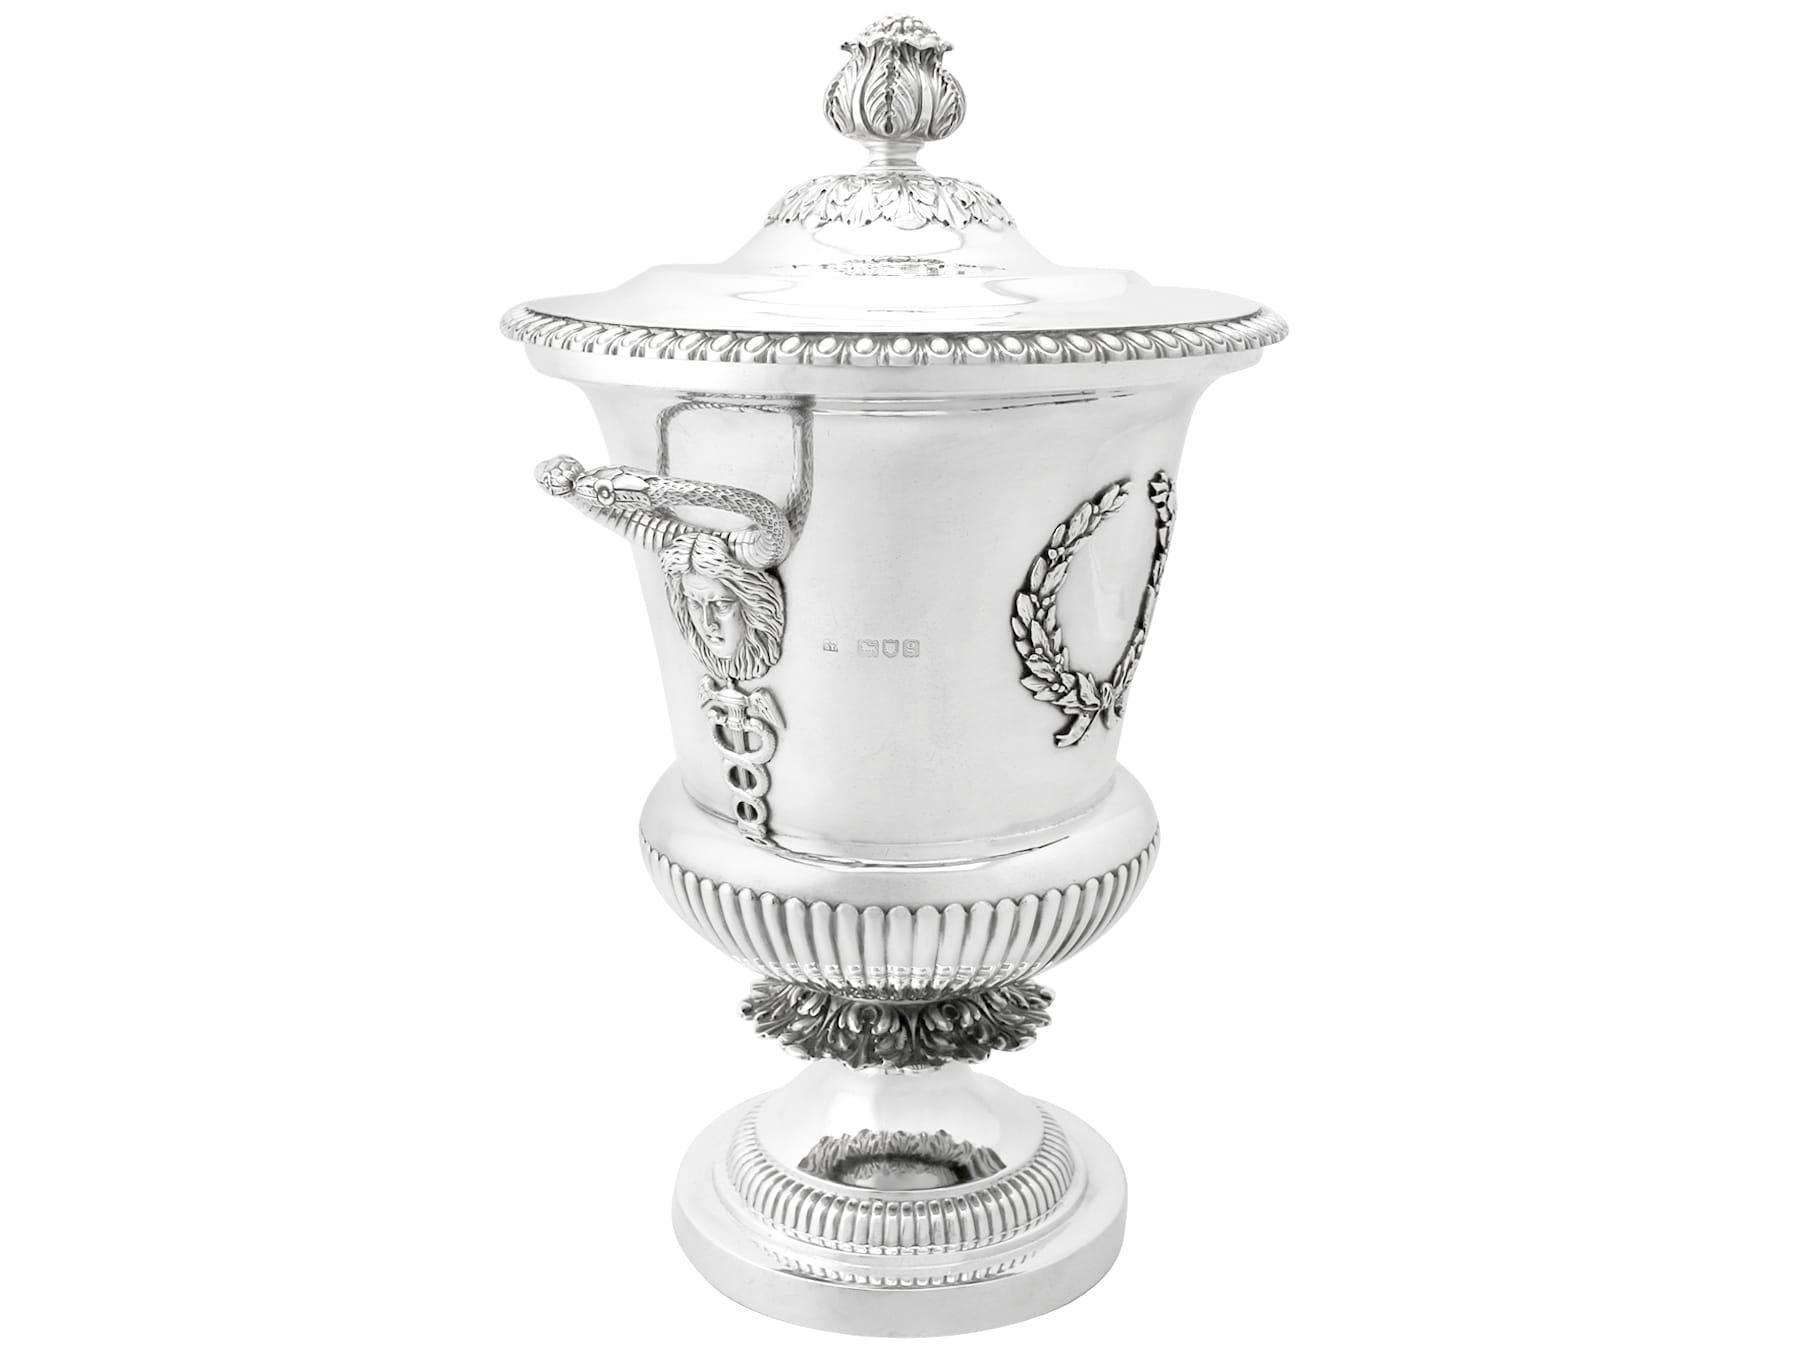 English Antique Edwardian Sterling Silver Presentation Cup and Cover For Sale